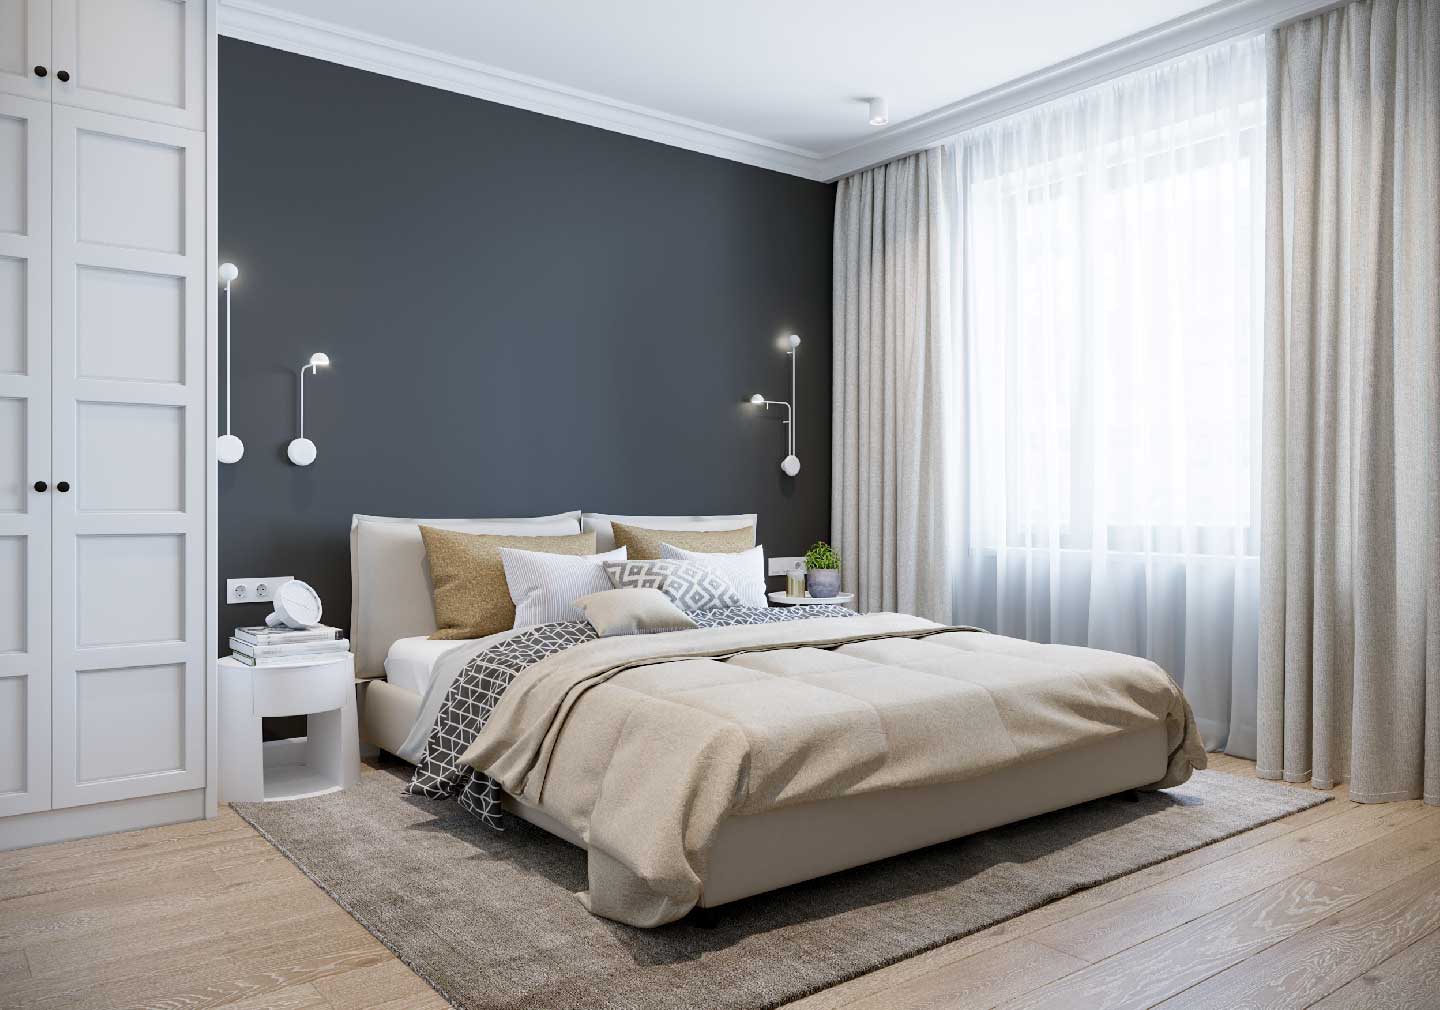 design tips to enhance your bedroom space